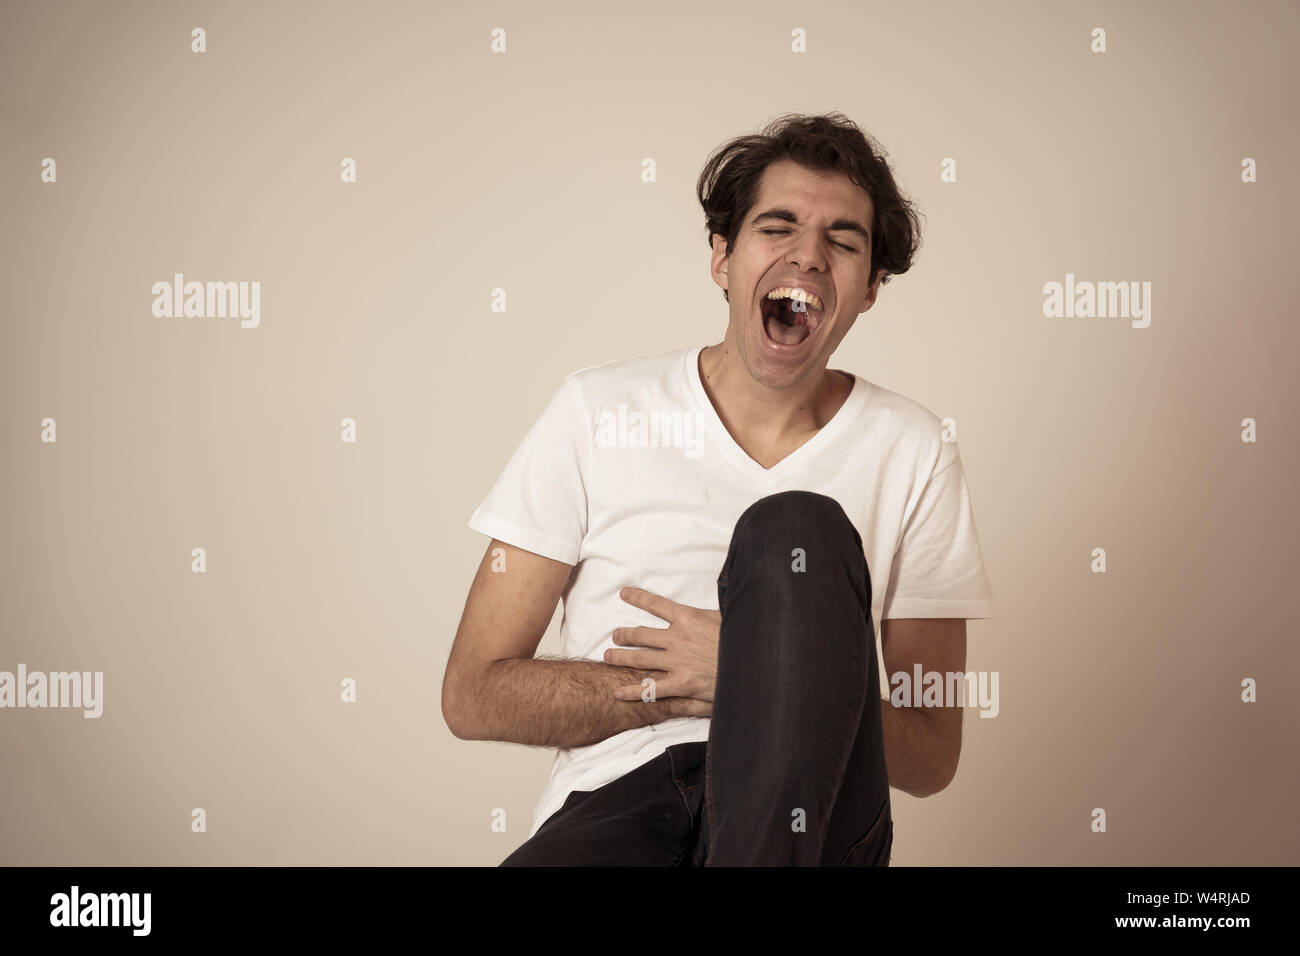 Portrait of young millennial funny male having fun bursting into laughing loudly after hearing humor anecdotes and jokes. Isolated against neutral bac Stock Photo